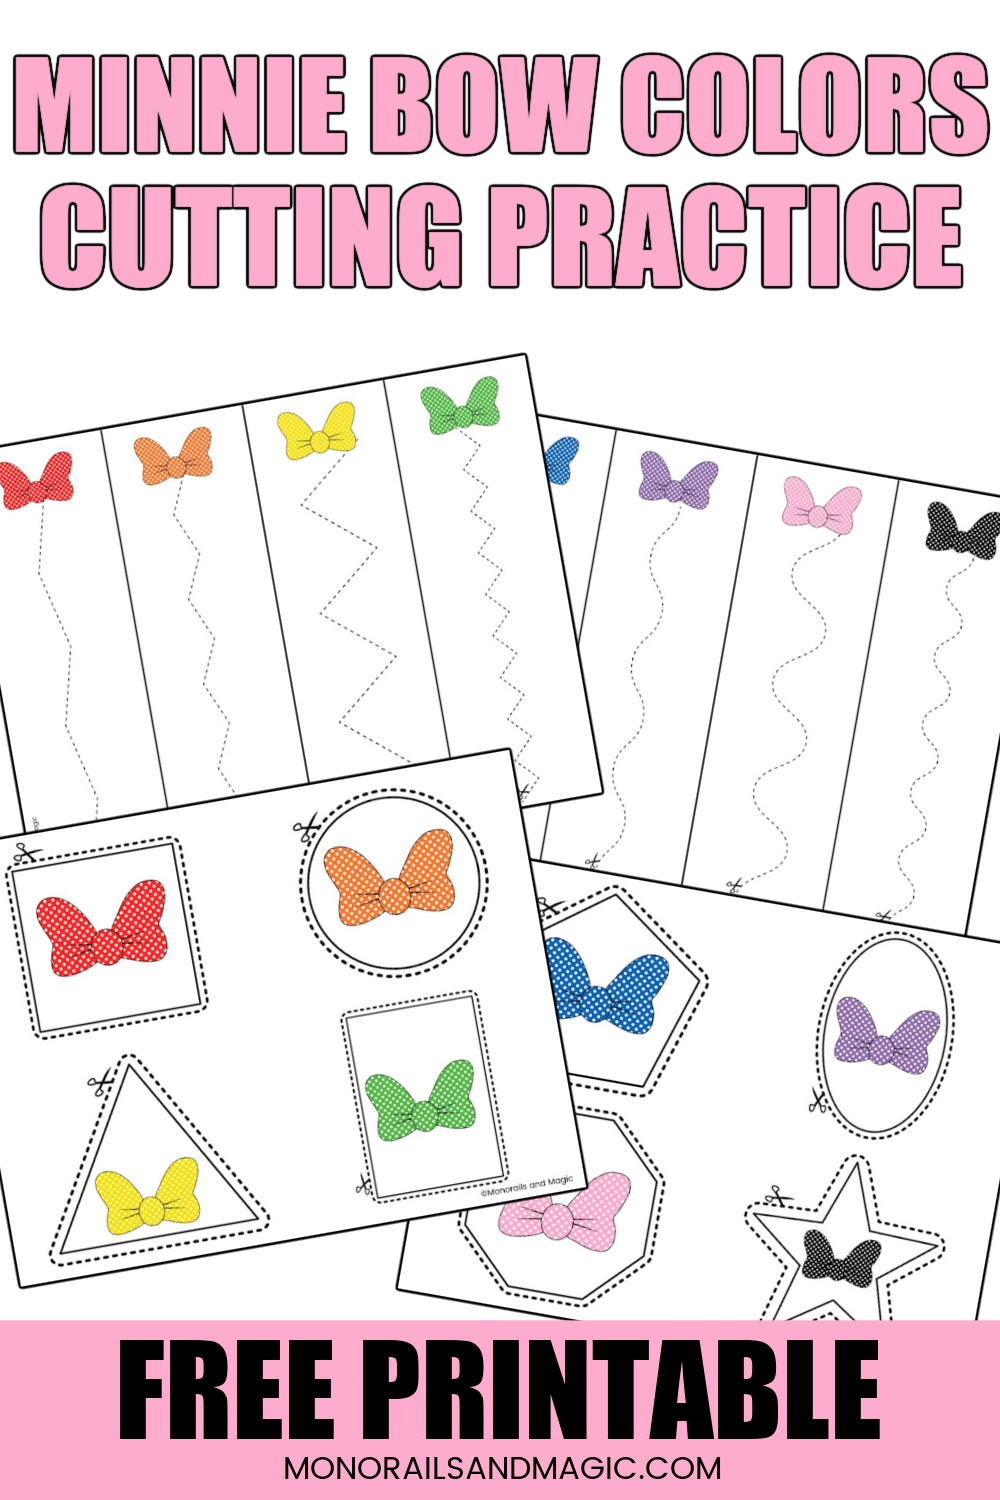 Free printable Minnie Mouse bow colors cutting practice pages for scissor skills.